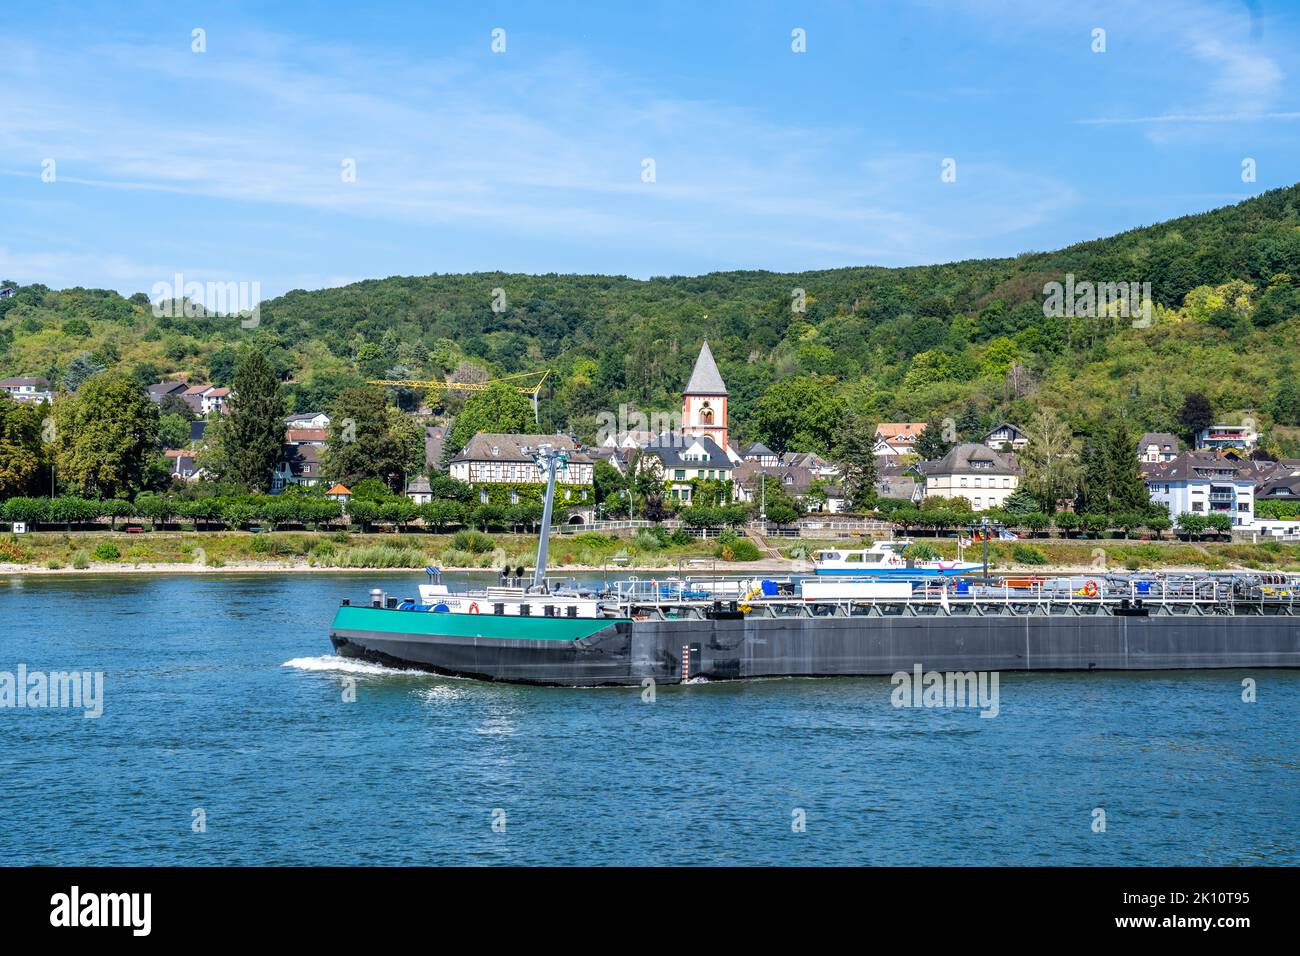 View to Erpel from Remagen, Rhine Valley, Germany Stock Photo